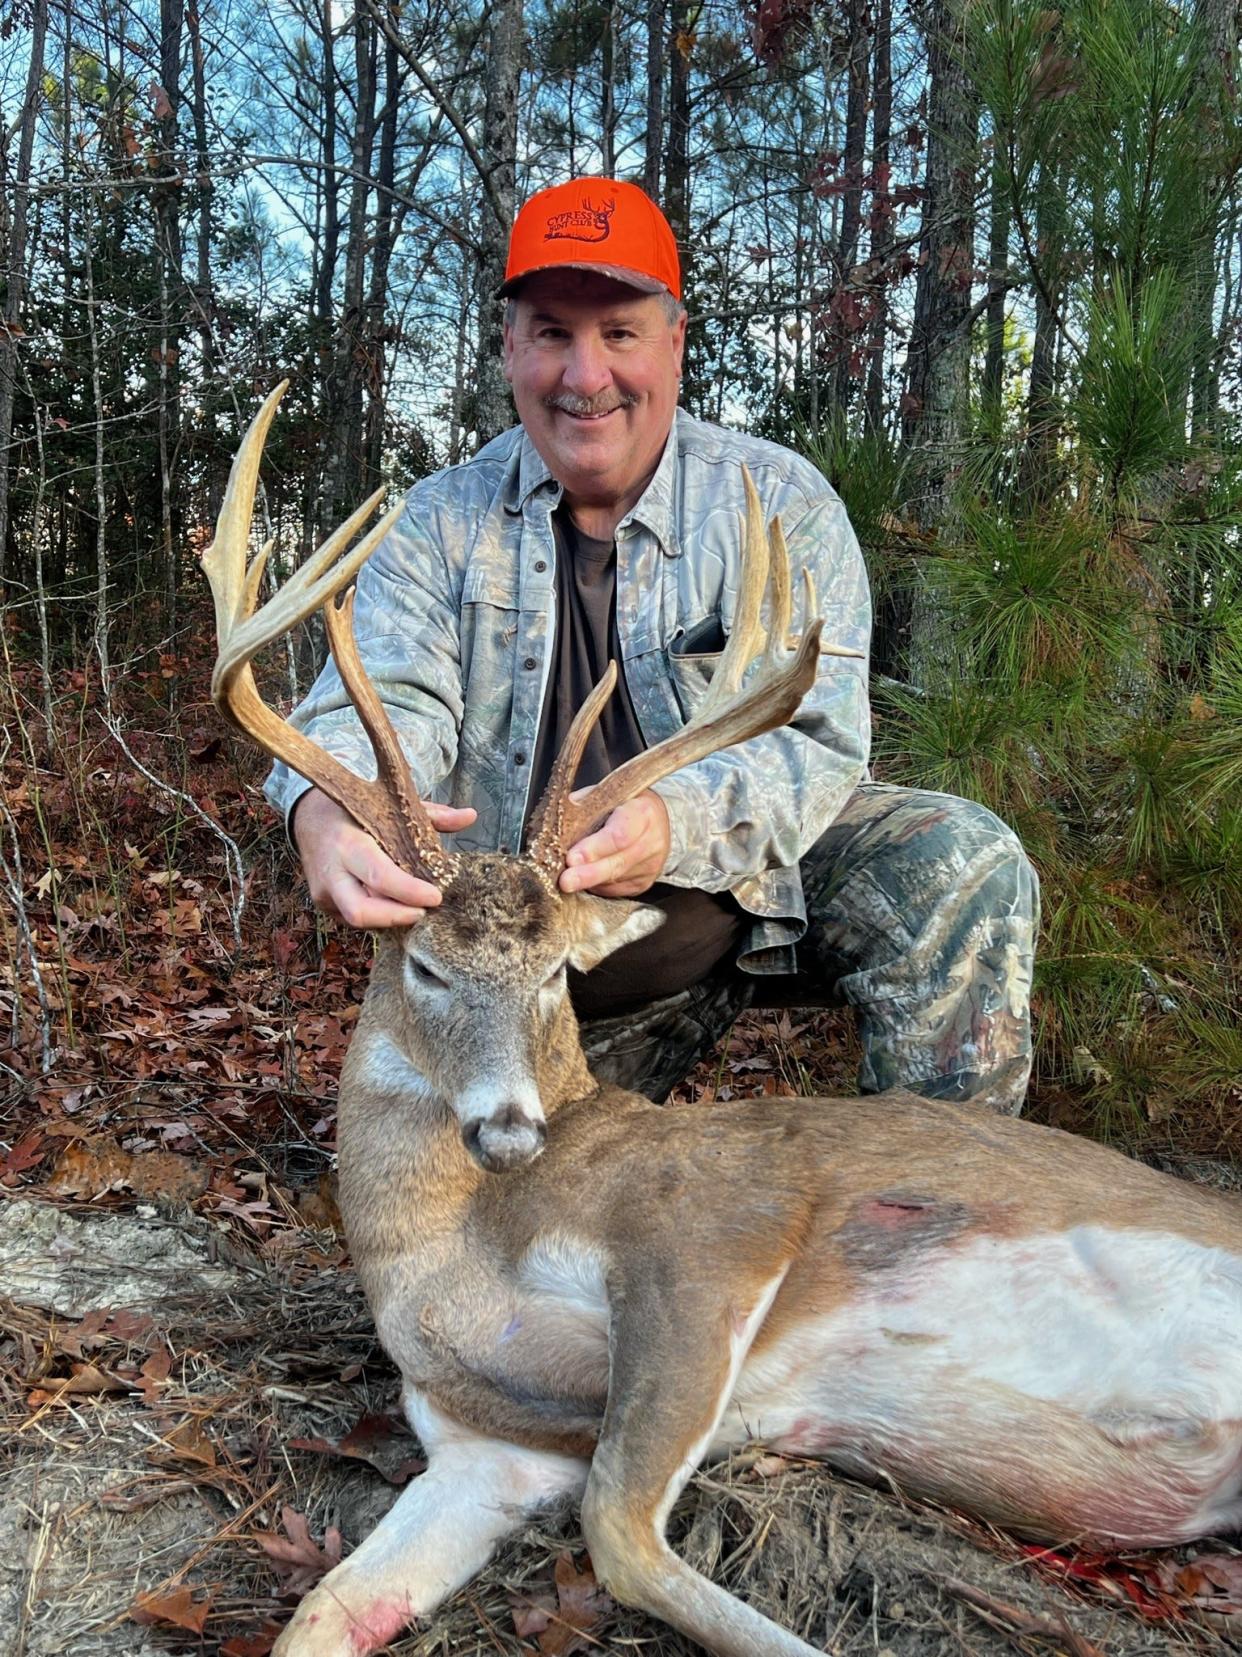 David "Dave" Slaybaugh Sr. poses with his 13-point buck harvest in Surry County harvest in November 2013.